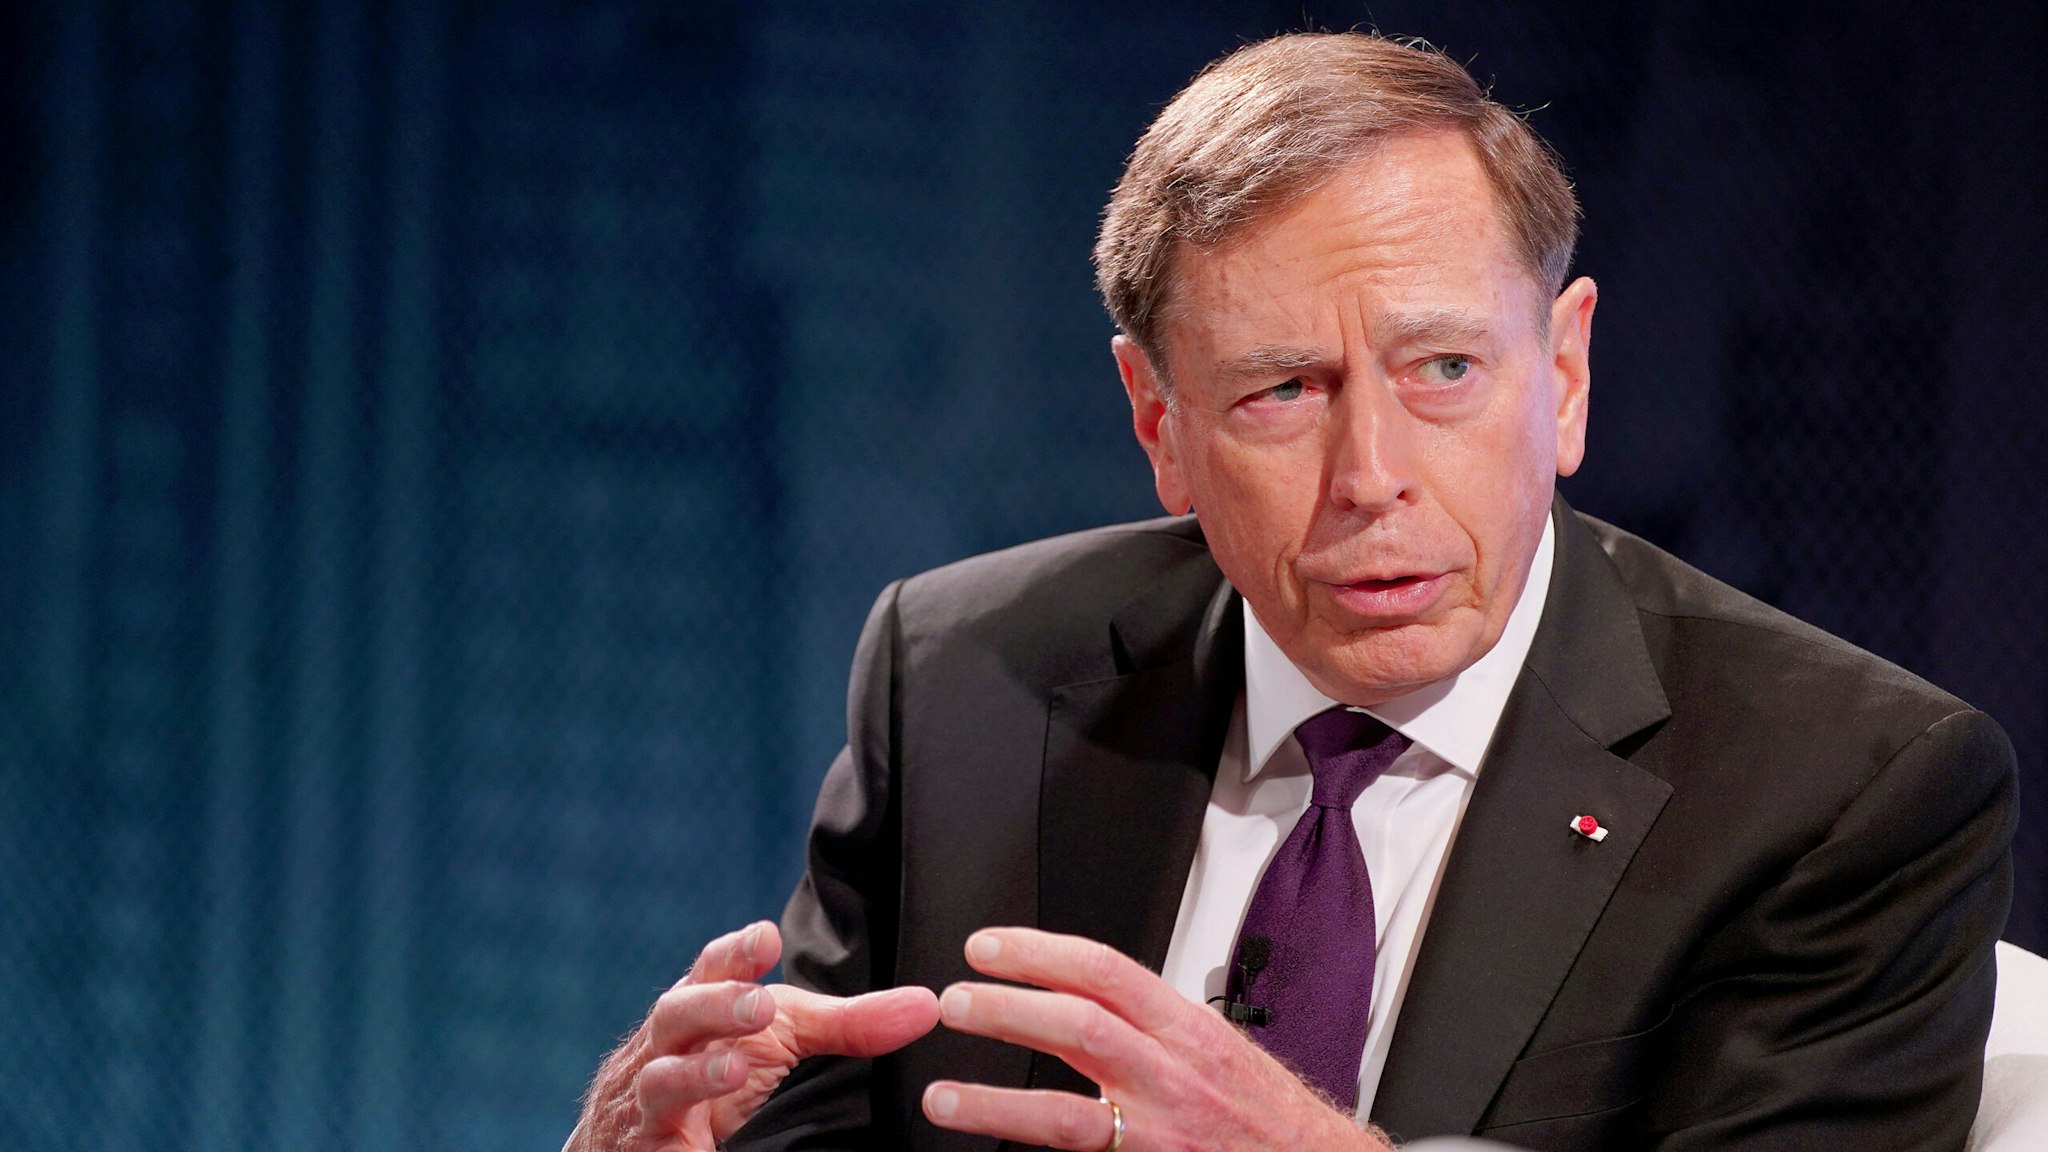 NEW YORK, NEW YORK - SEPTEMBER 22: David Petraeus, Chairman, KKR Global Institute speaks onstage during the 2021 Concordia Annual Summit - Day 3 at Sheraton New York on September 22, 2021 in New York City.